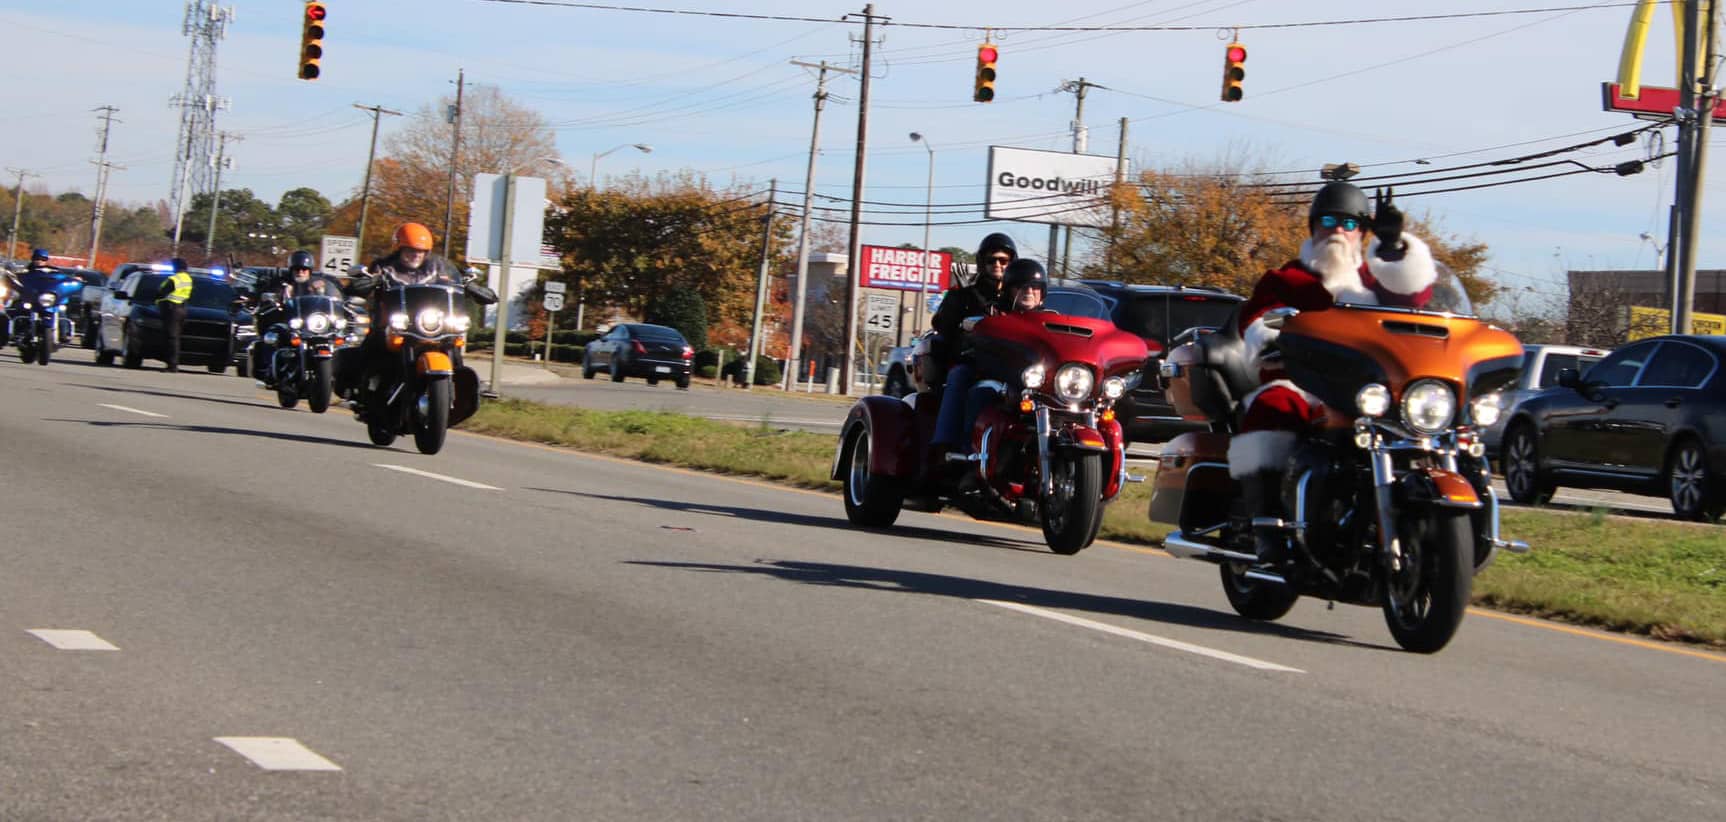 31st Annual Toy Run to Benefit the Kennedy Children's Home Nov. 25.